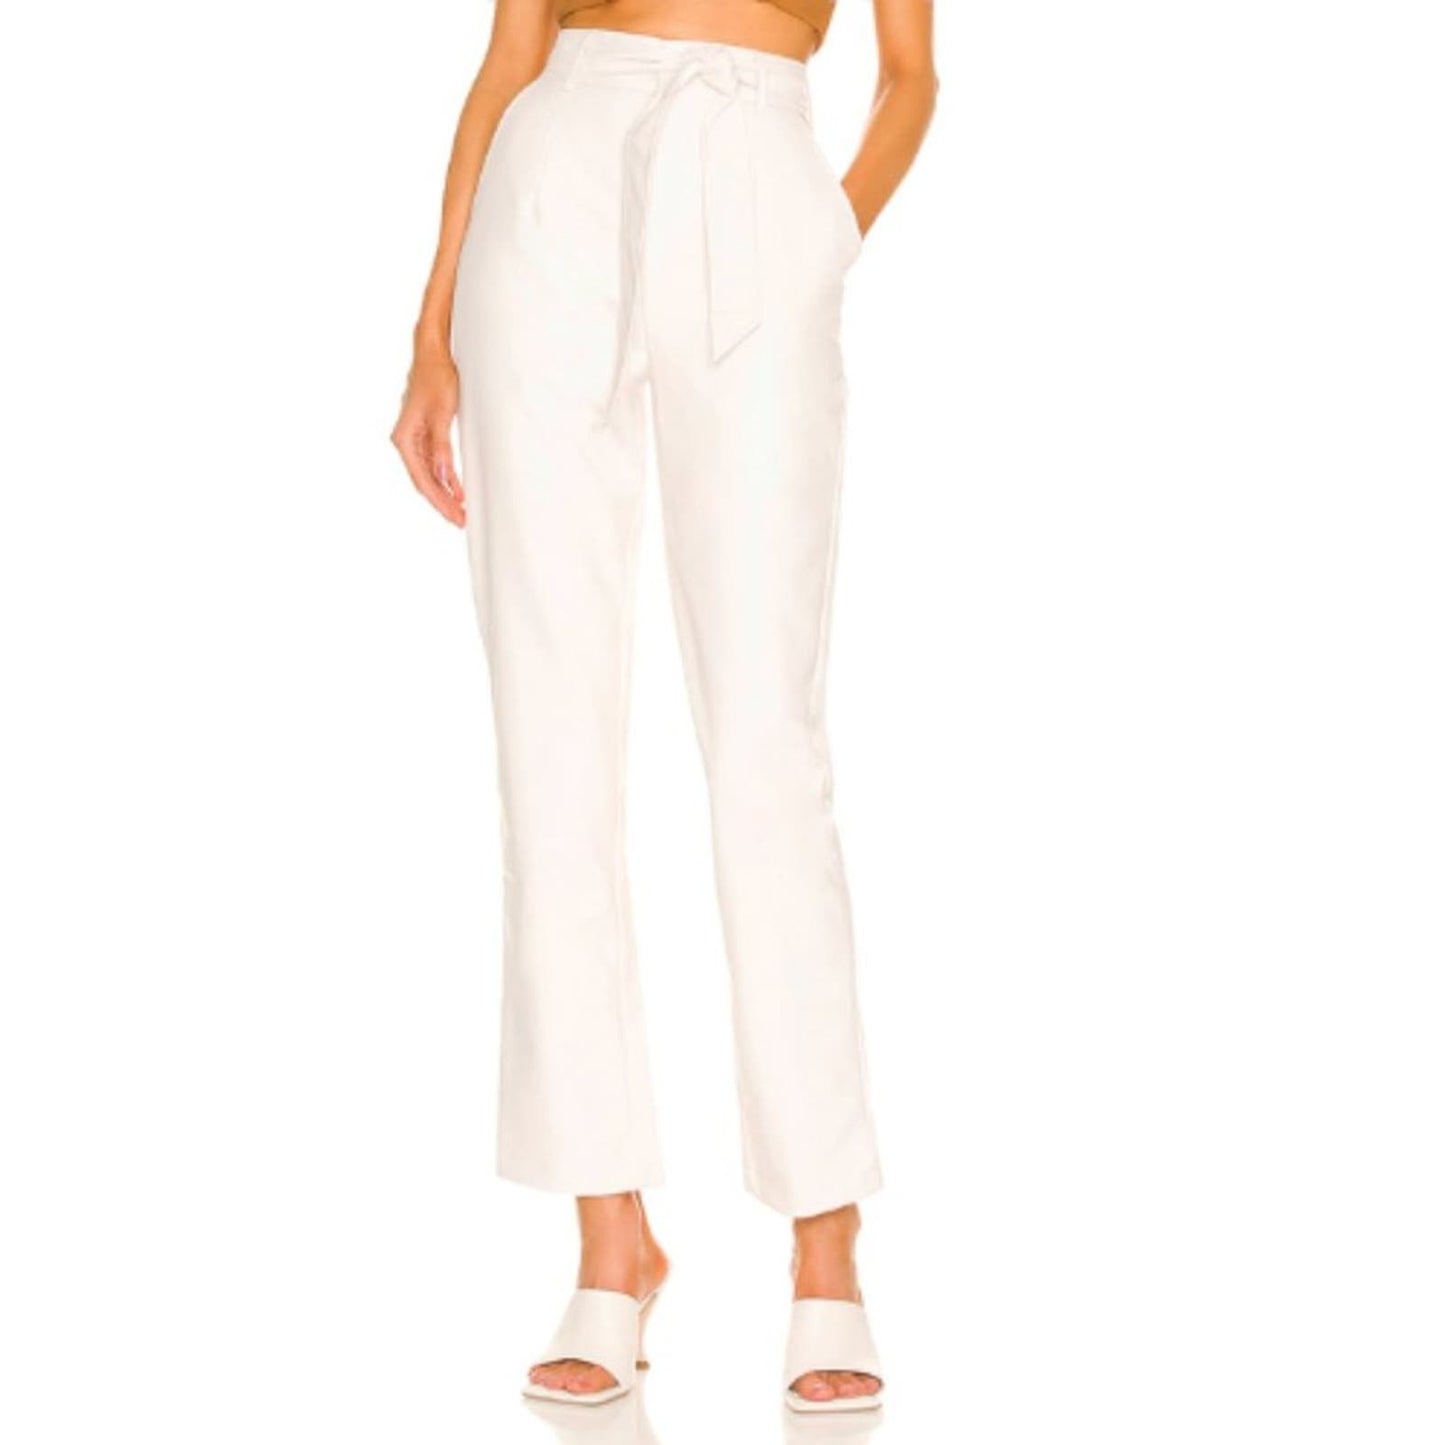 MORE TO COME Alani Pant in White NWT Size Small